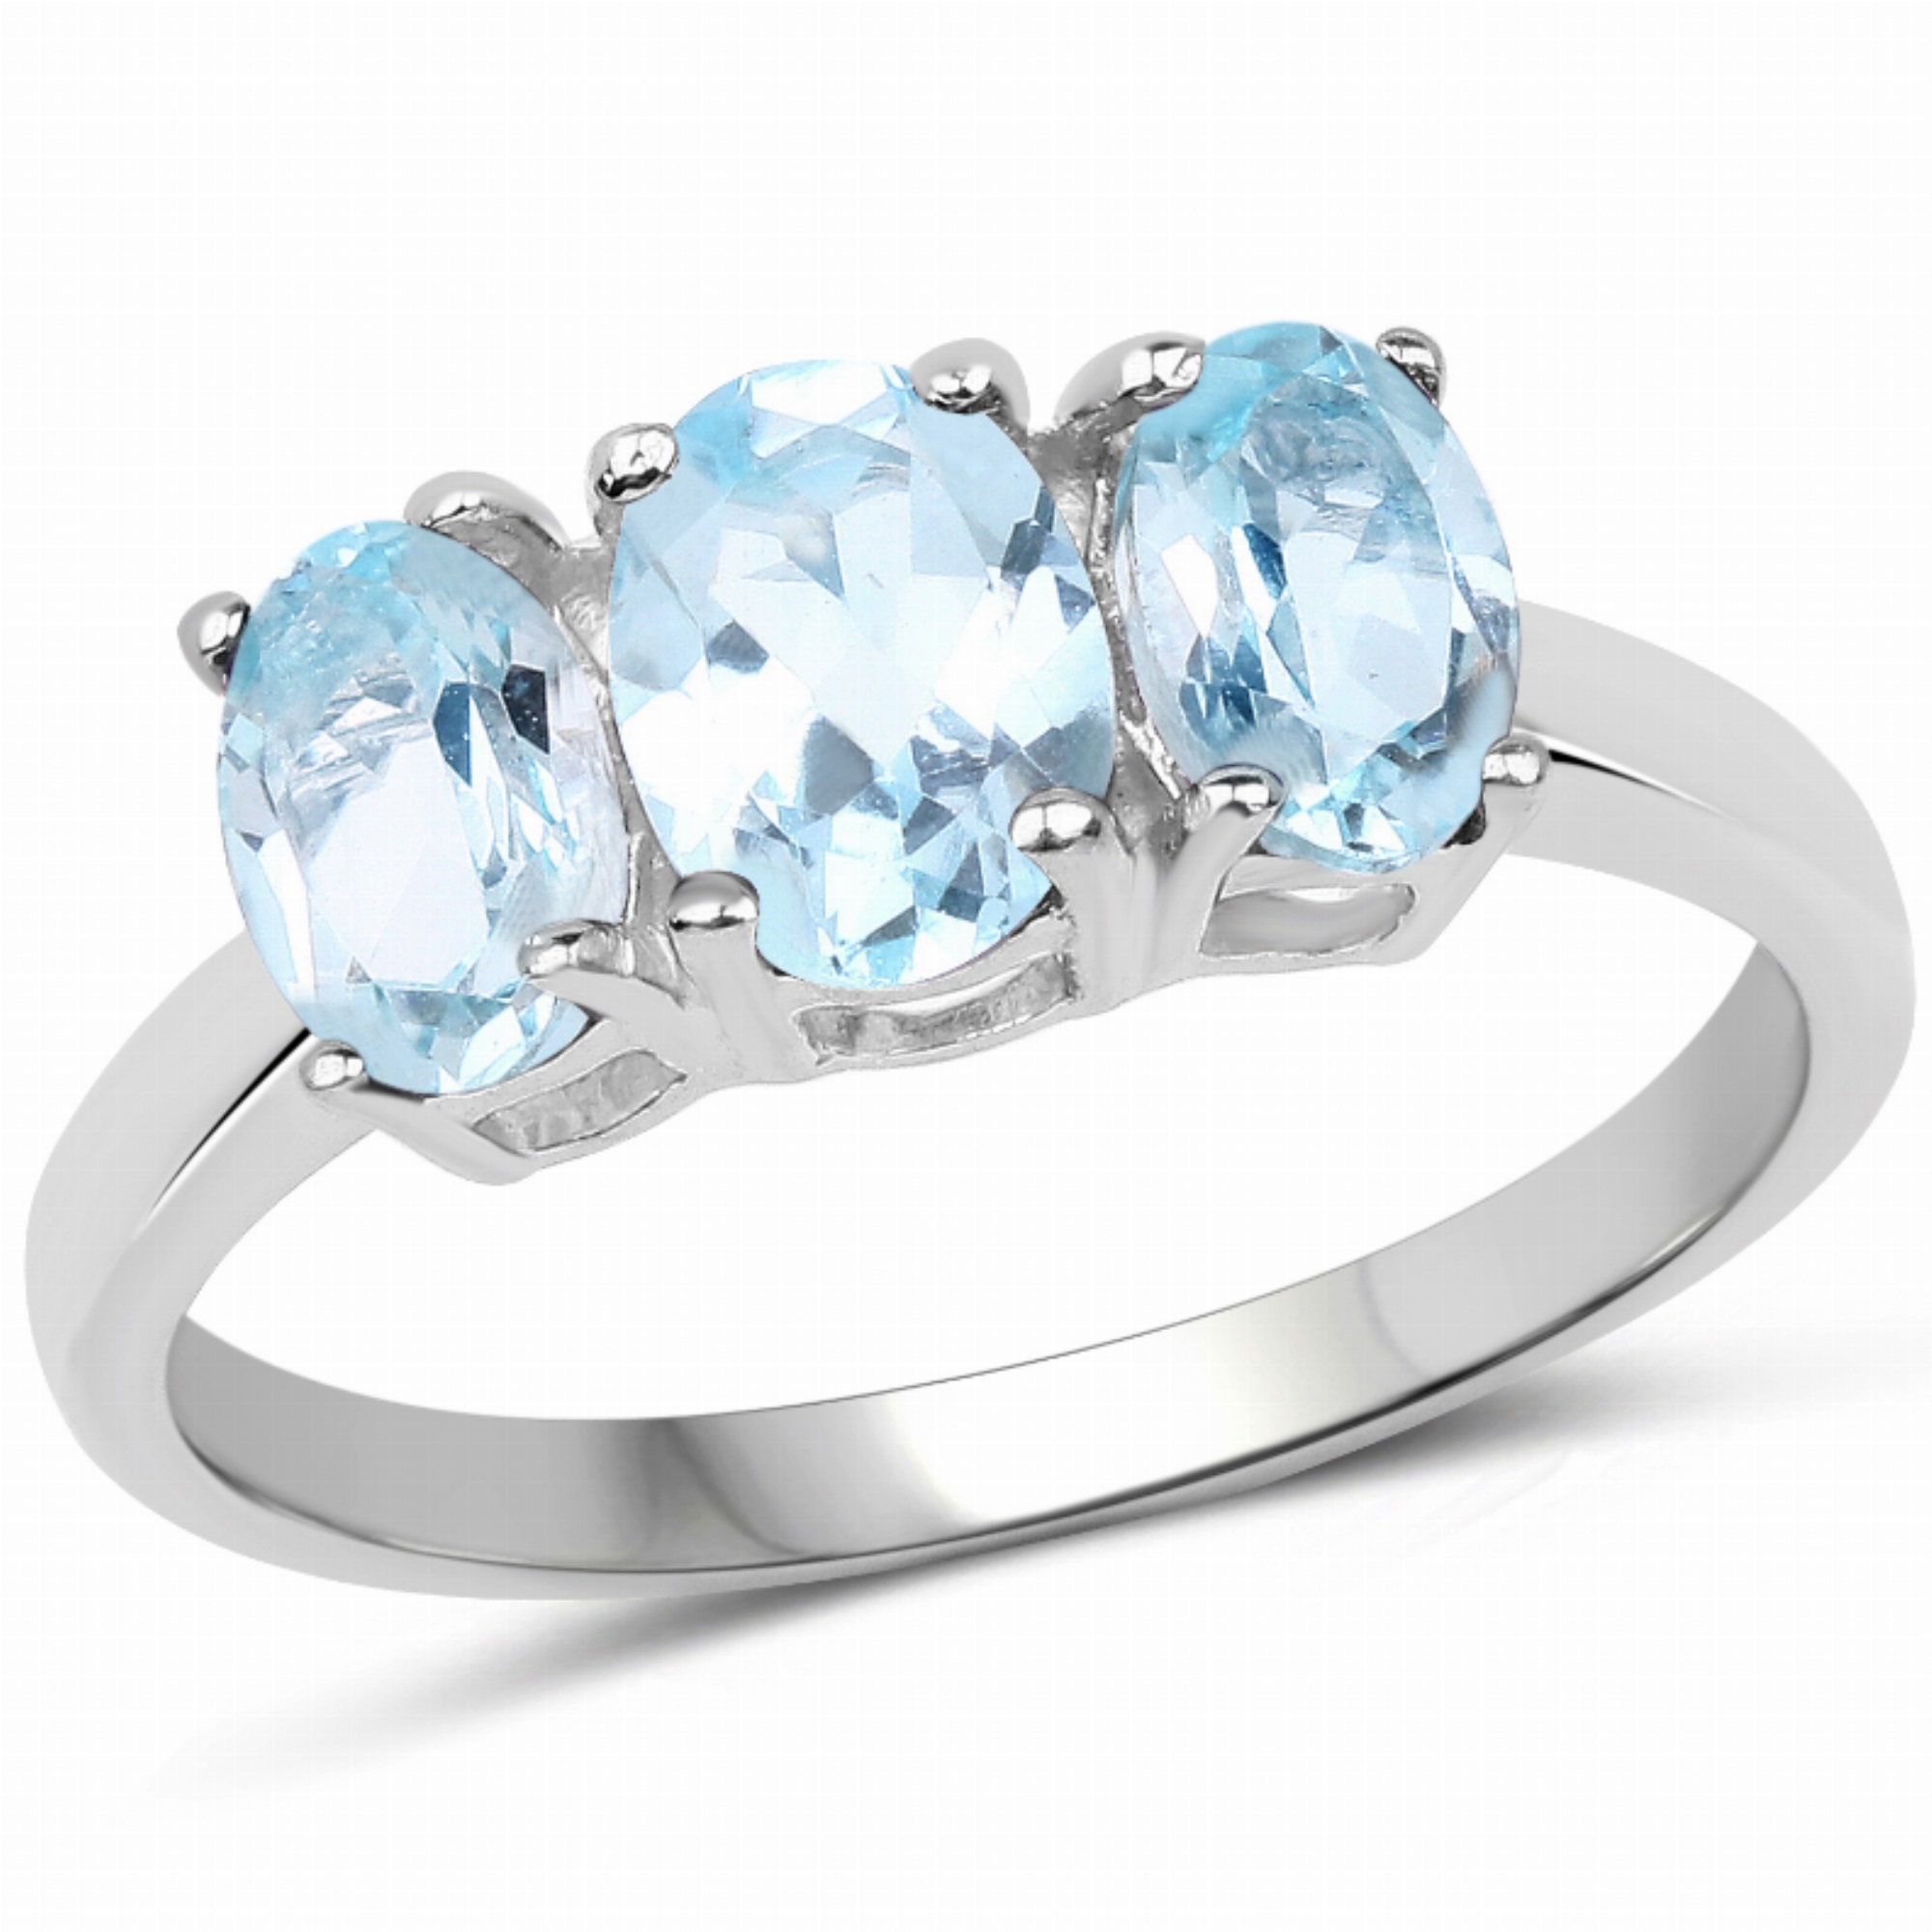 Quintessence Jewelry 1.97 Carat Genuine Blue Topaz .925 Sterling Silver Ring